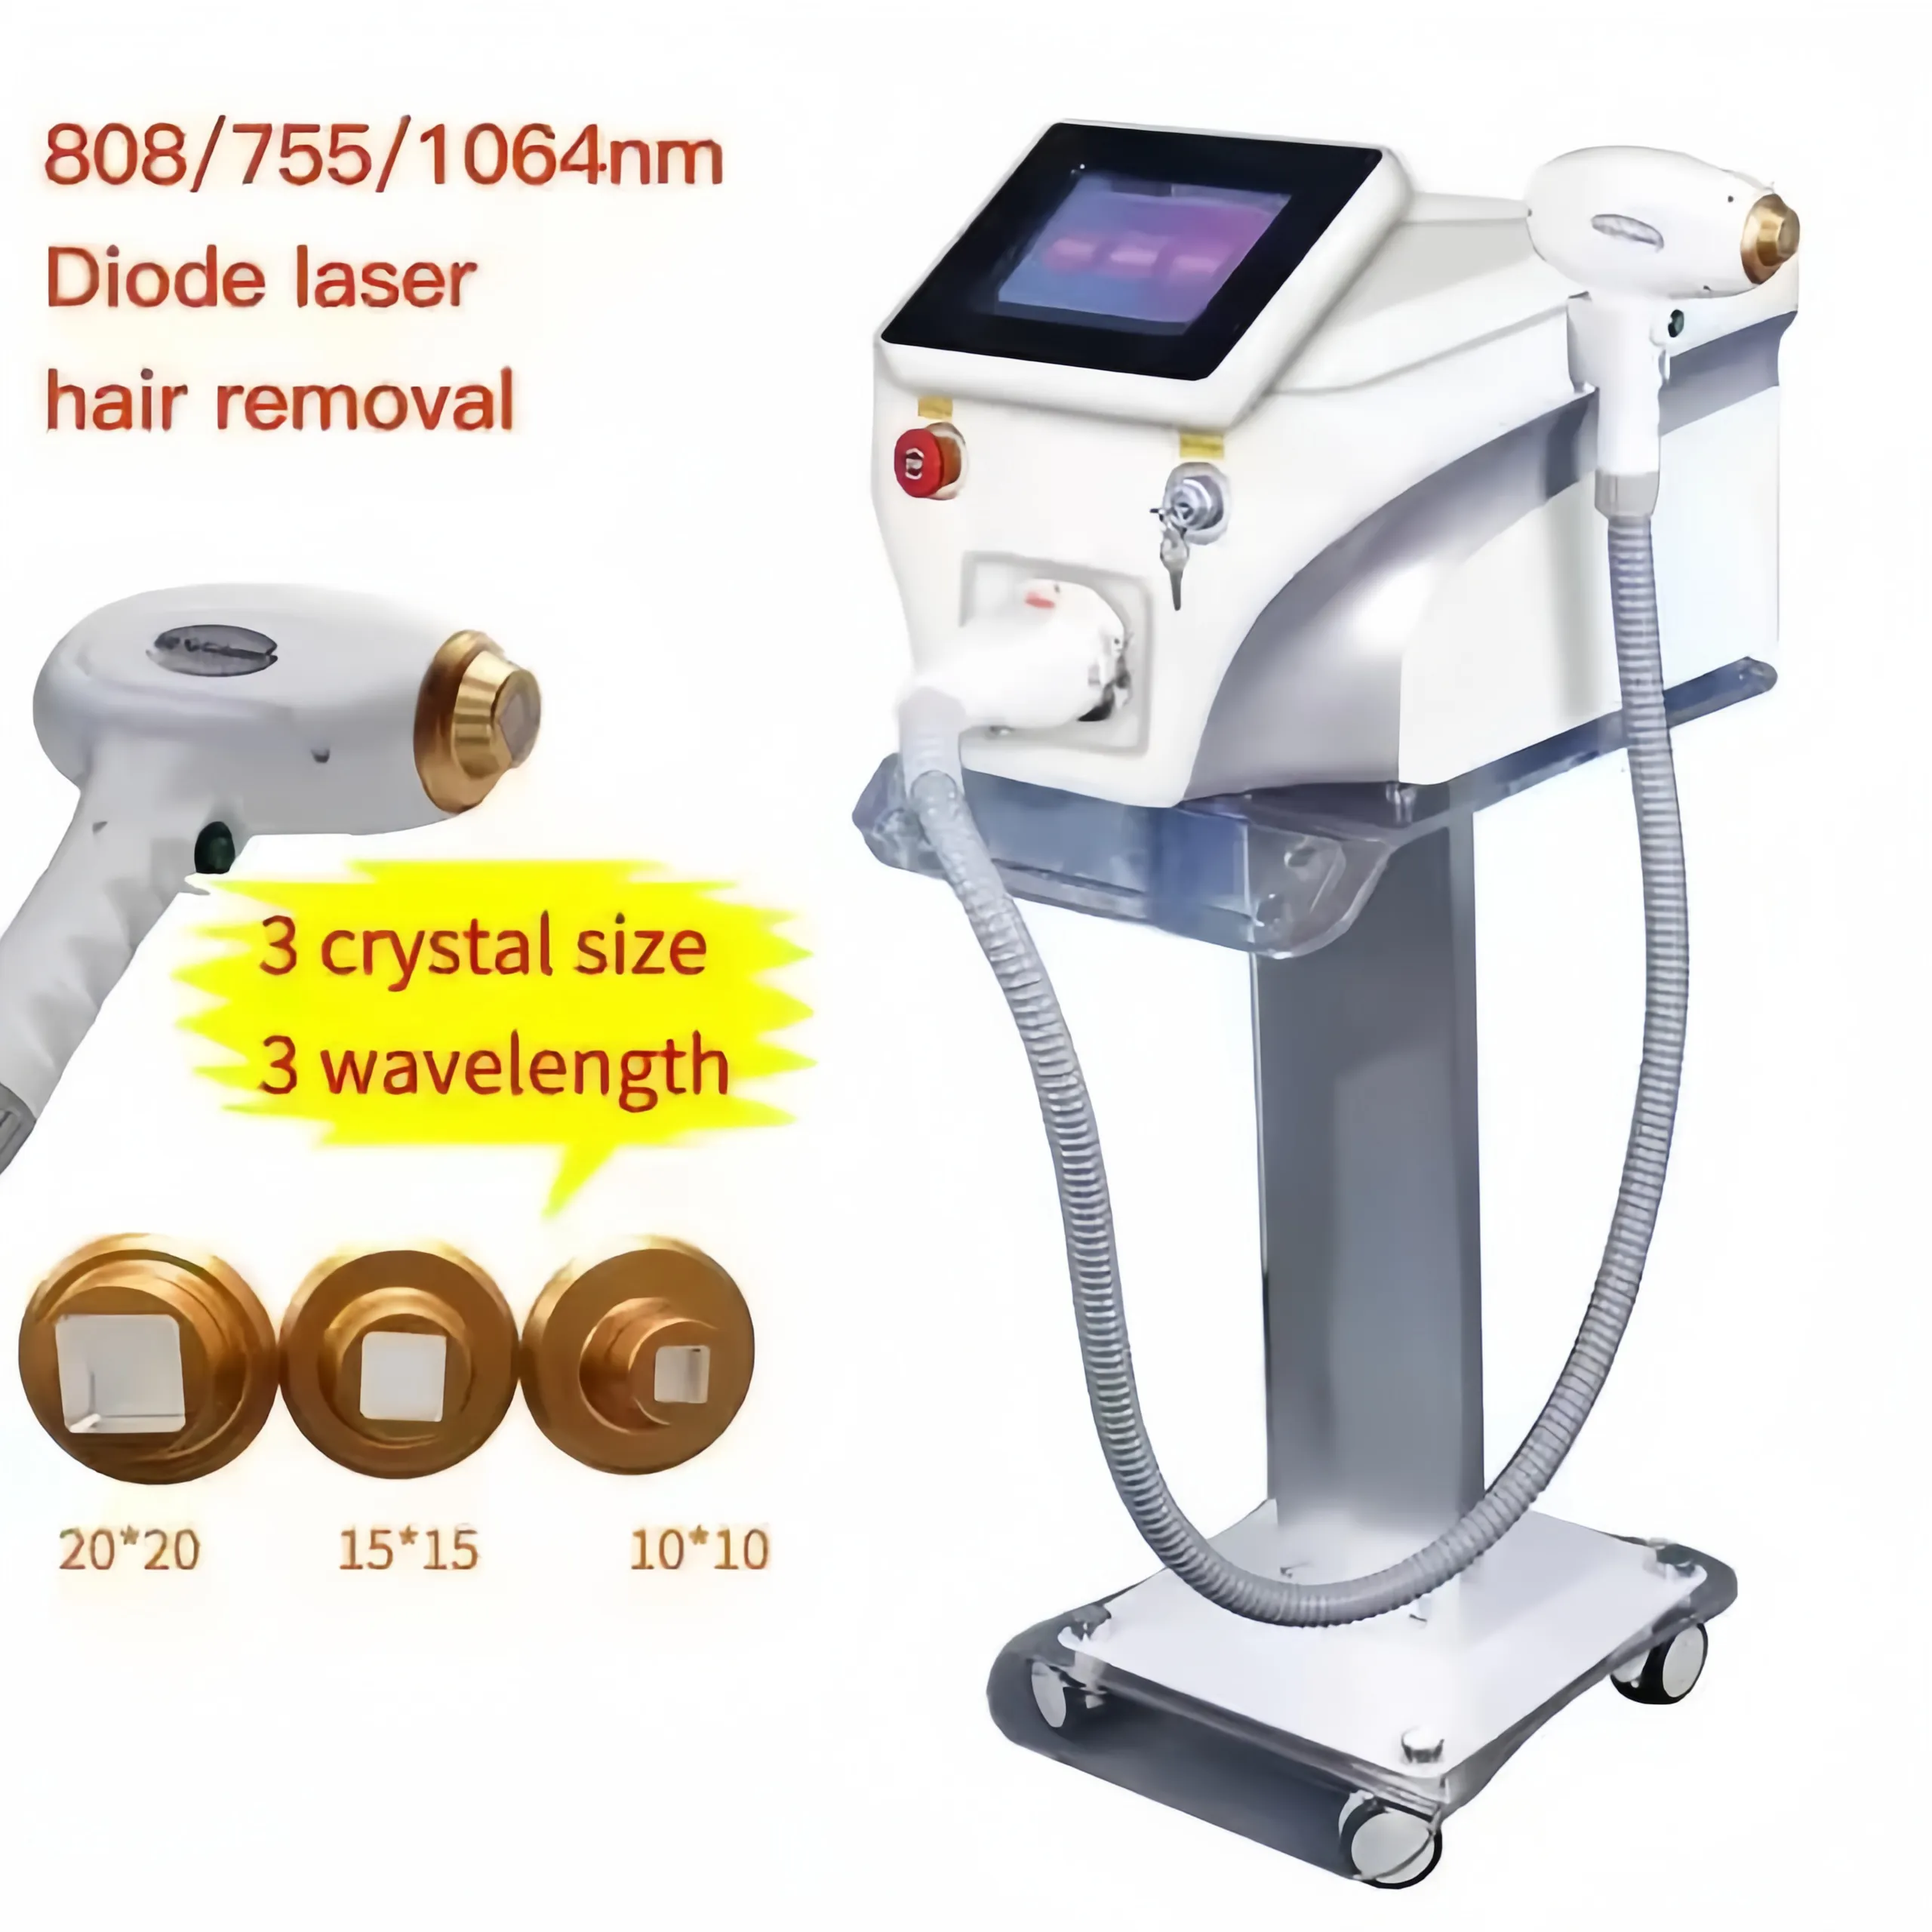 Spa Salon Use 808 Diode Laser Hair Removal Machine Portable 755Nm 808Nm 1064NM 3 Wavelength Laser Remove Hair Roots TEC Cooling Technology's Machine